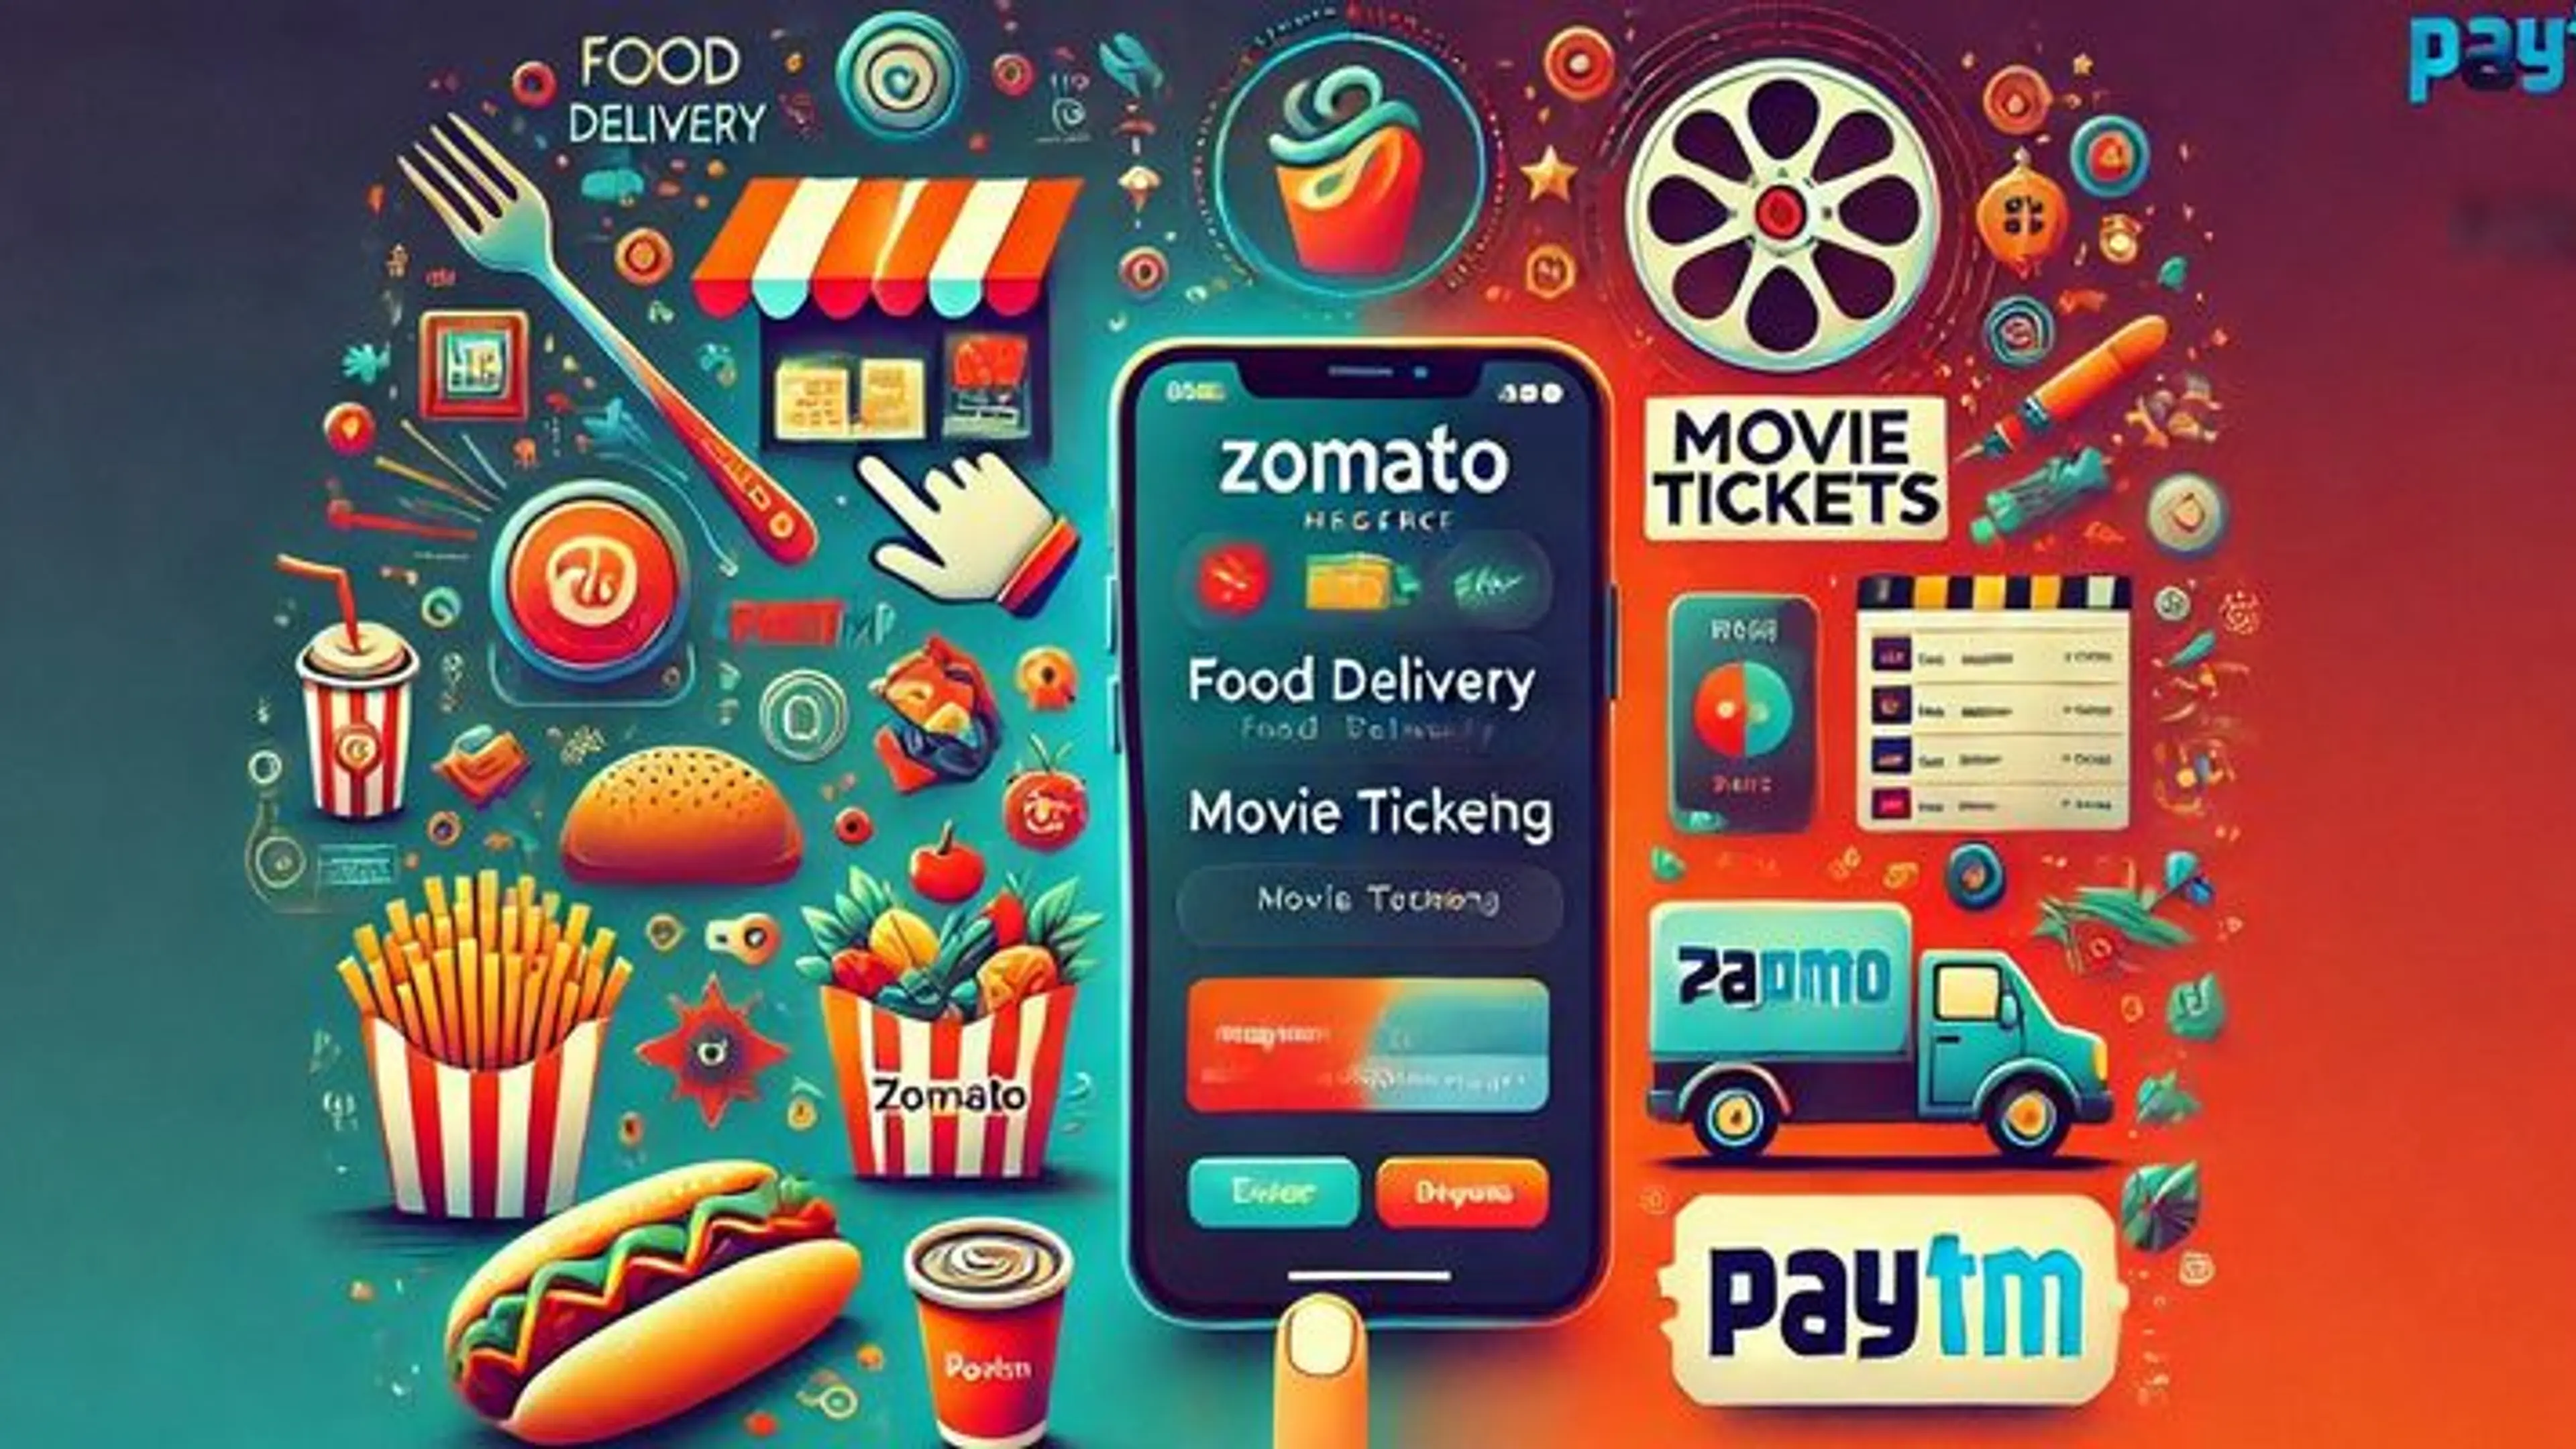 From Food Delivery to Movie Delivery: Zomato to take over Paytm's ticketing business